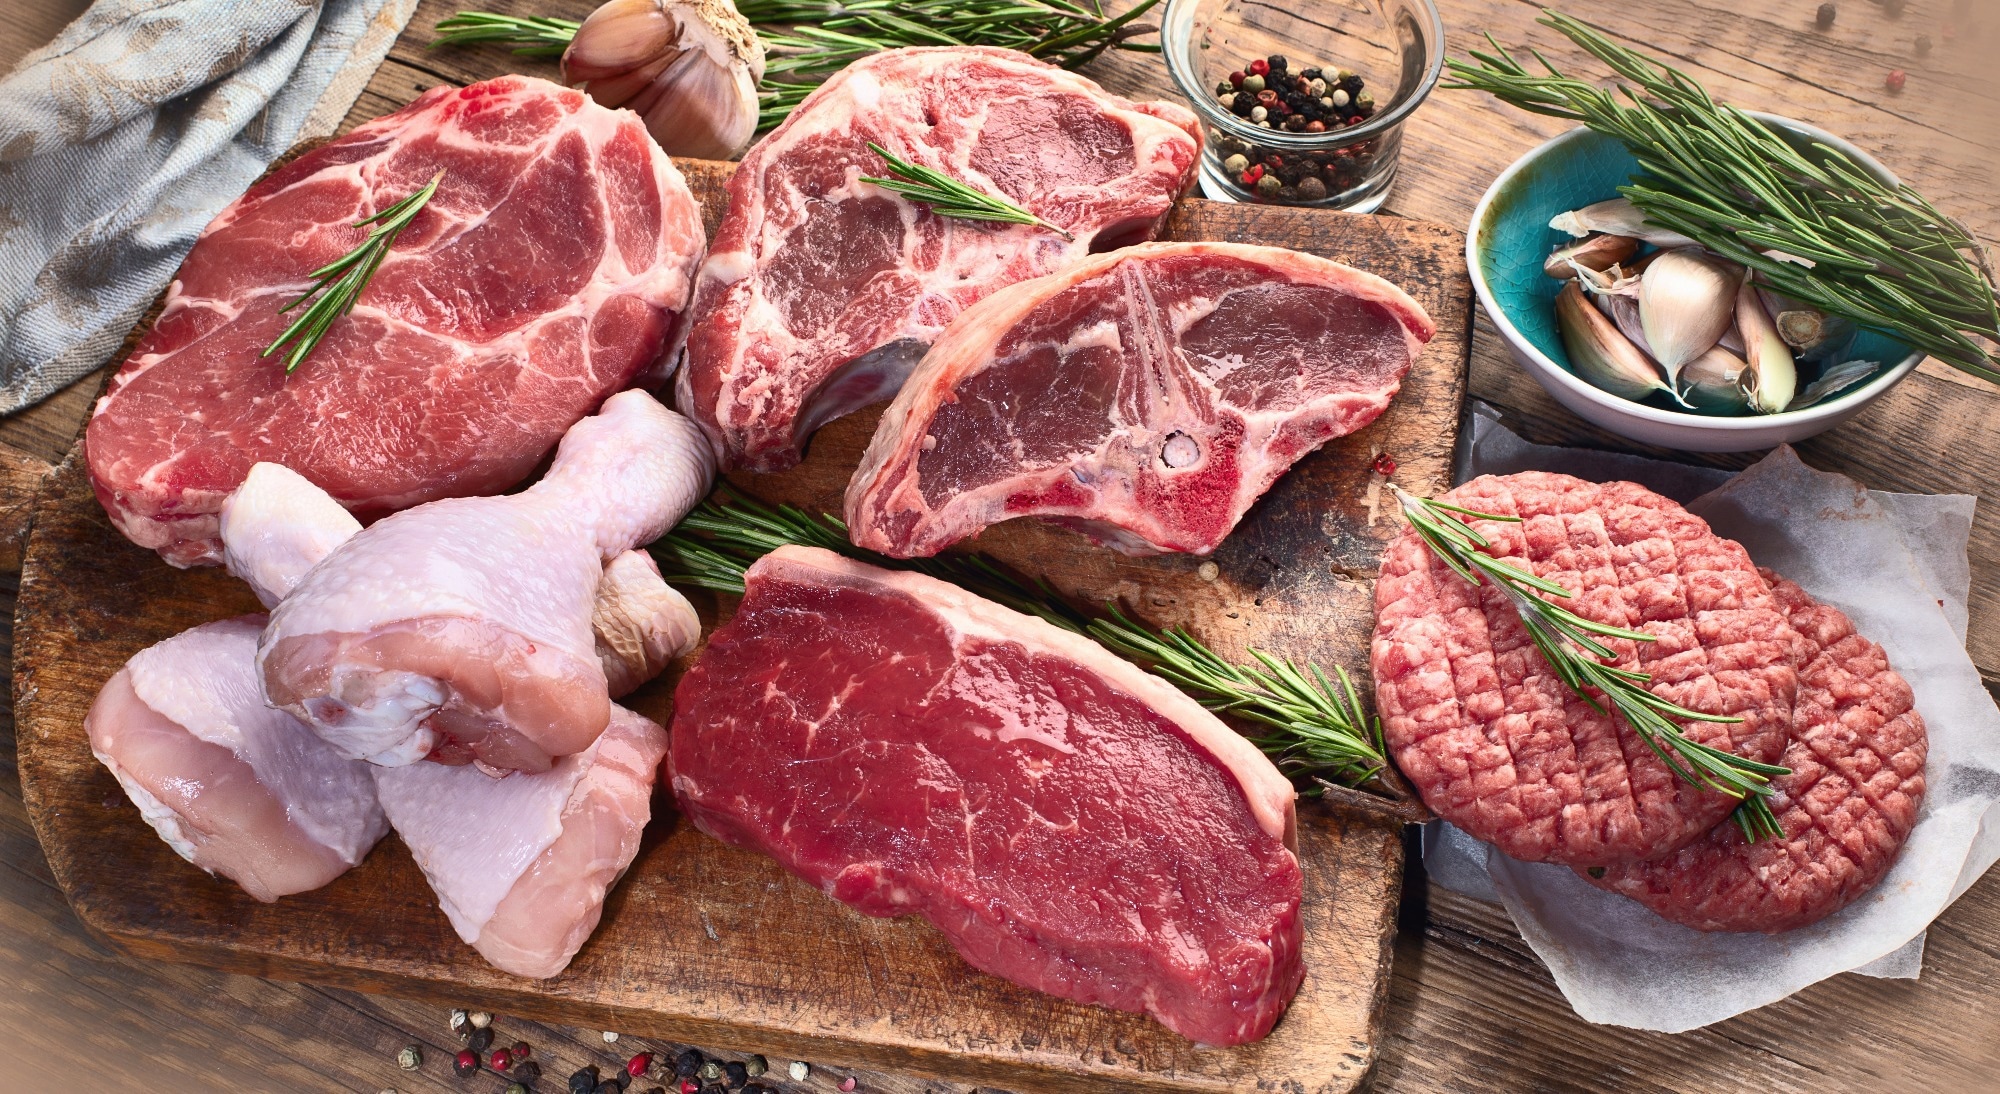 Study: Nutritional Effects of Removing a Serving of Meat or Poultry from Healthy Dietary Patterns—A Dietary Modeling Study. Image Credit: TatjanaBaibakova/Shutterstock.com